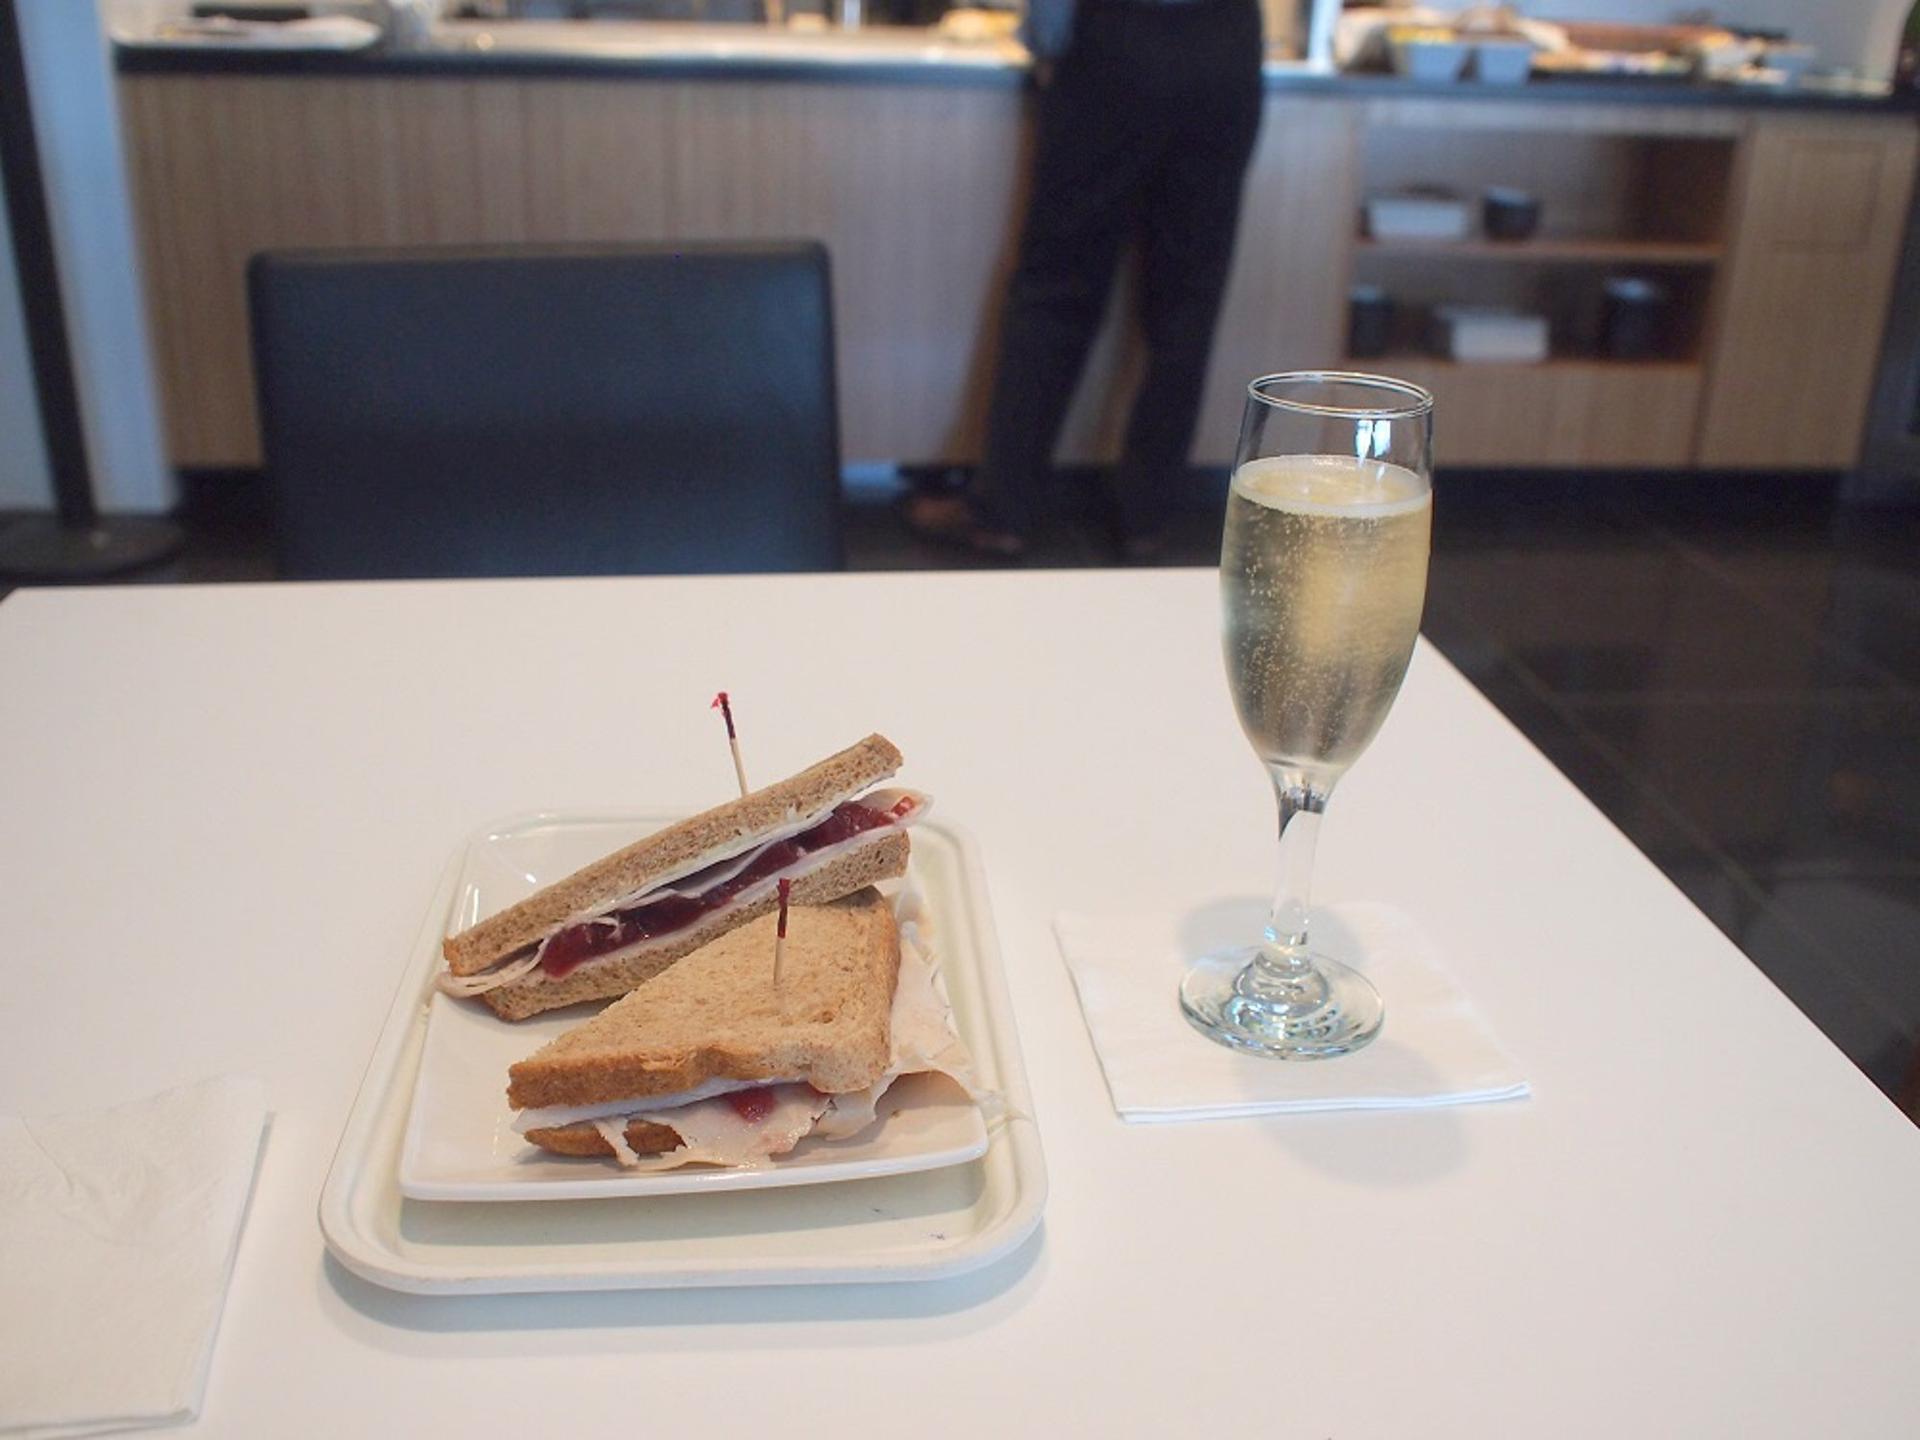 Cathay Pacific First and Business Class Lounge image 38 of 74